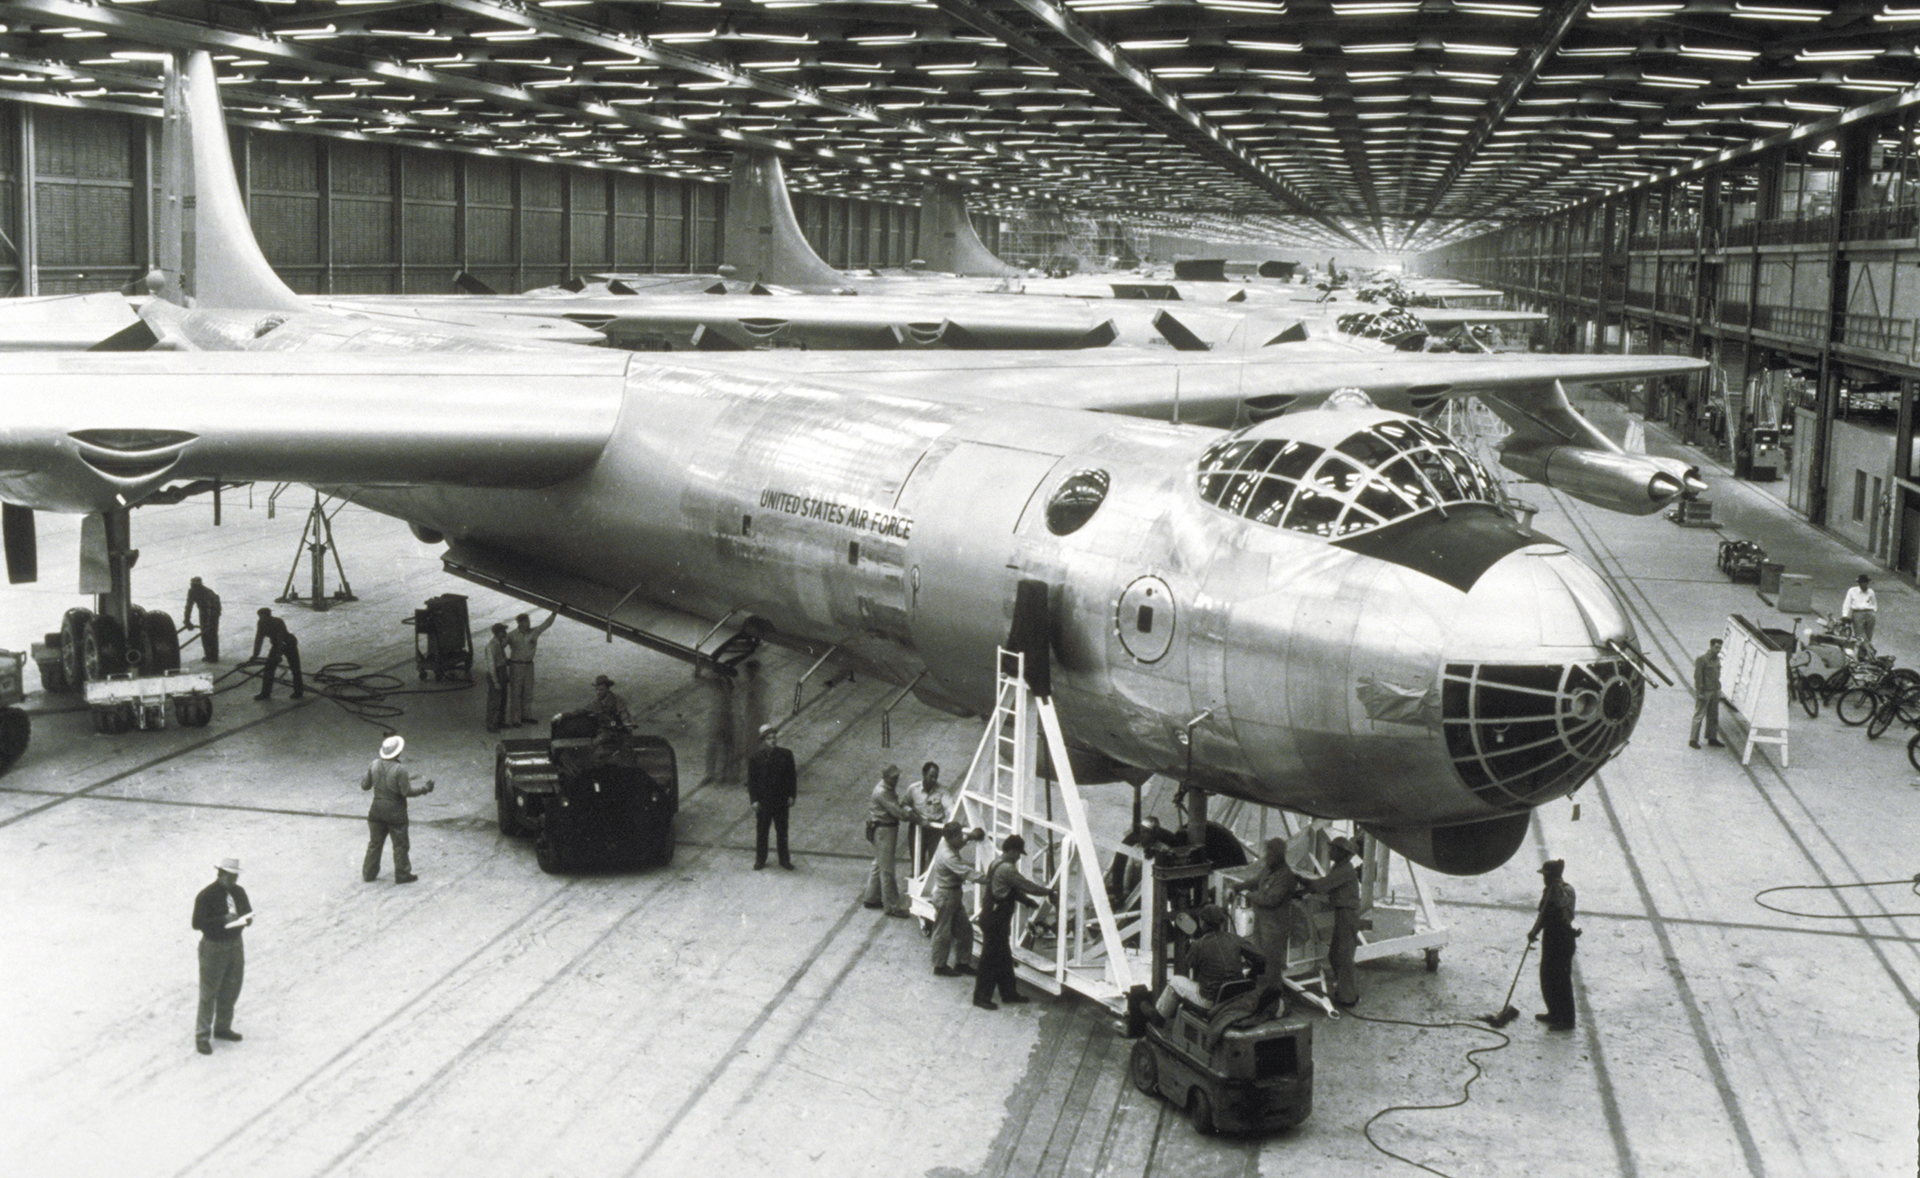 Consolidated B-36: A Visual History of the Convair B-36 Peacemaker